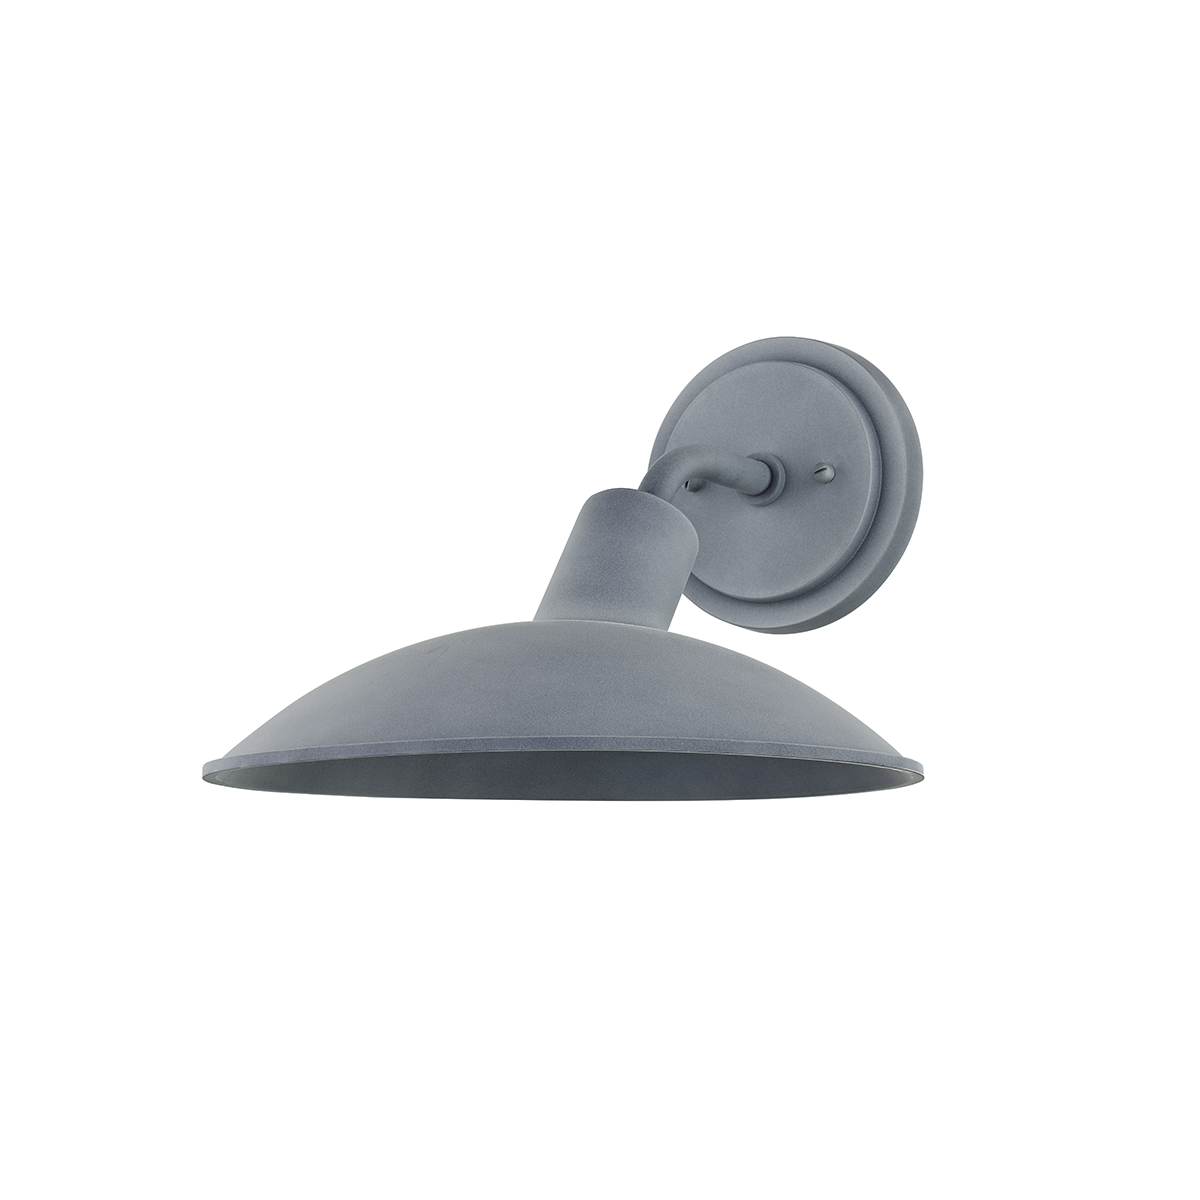 Troy Lighting 1 LIGHT SMALL EXTERIOR WALL SCONCE B8812 Outdoor l Wall Troy Lighting WEATHERED ZINC  